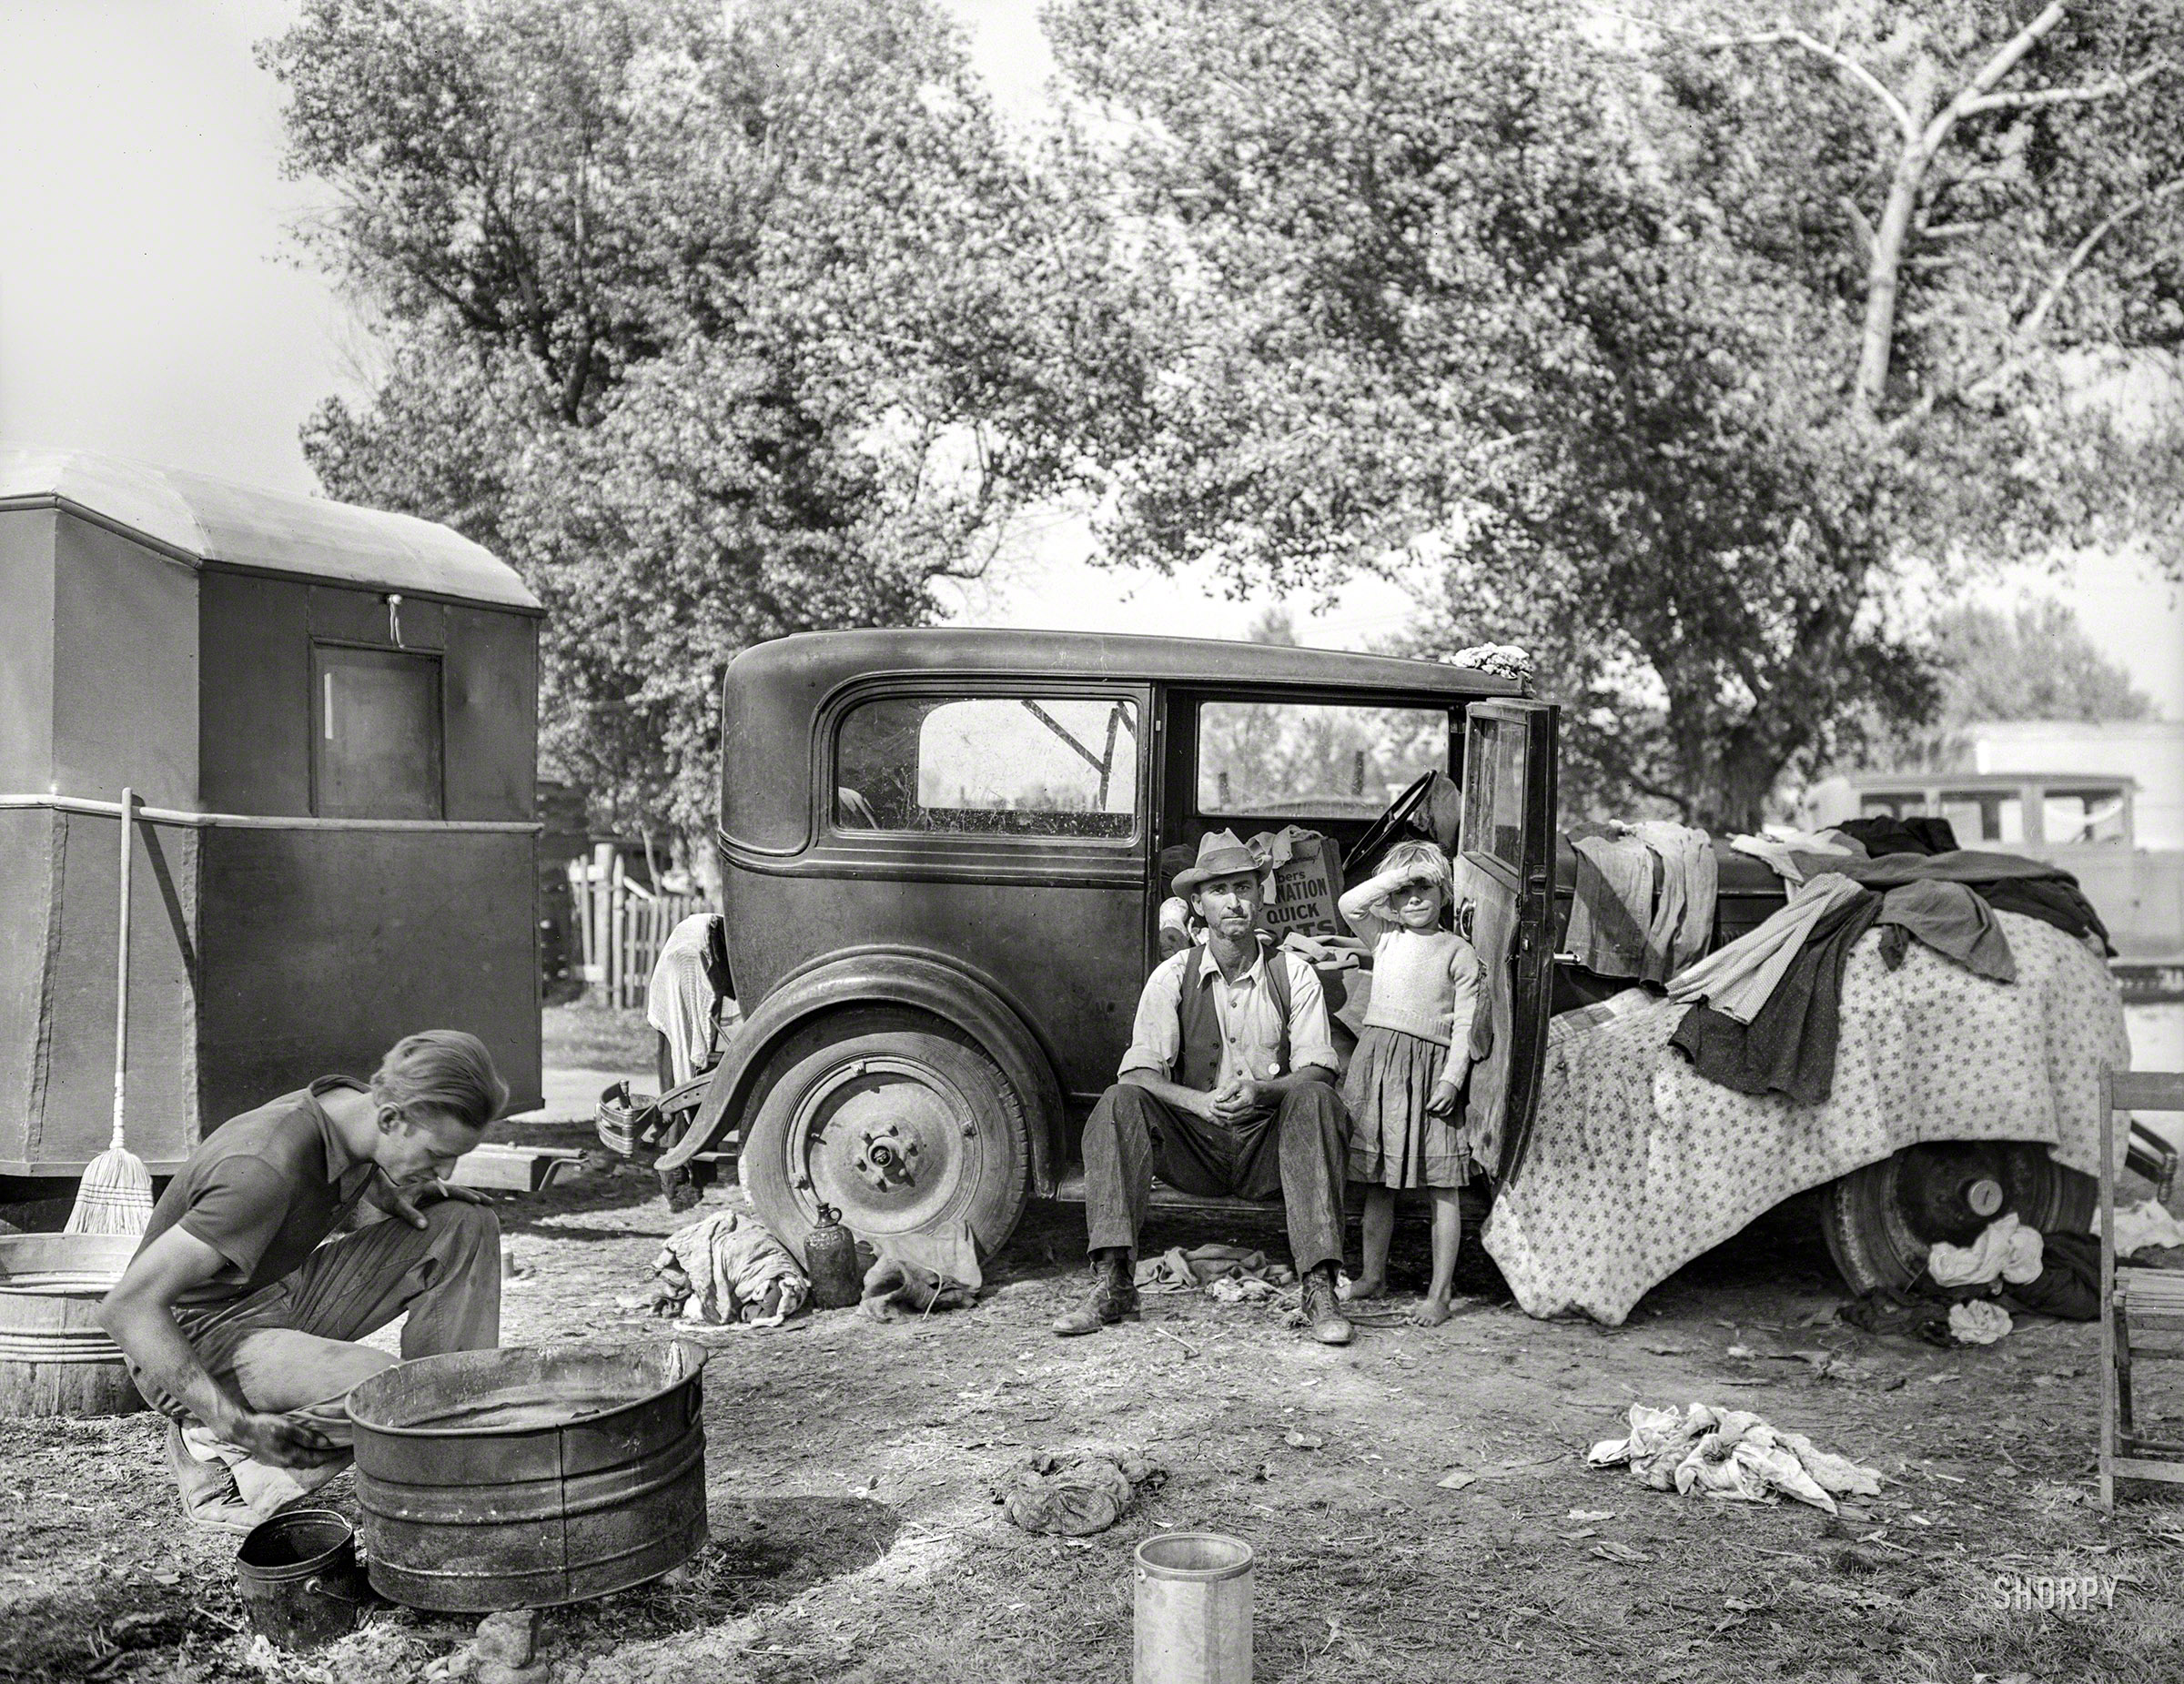 November 1936. "Migratory family in automobile camp, California." Photo by Dorothea Lange for the Farm Security Administration. View full size.